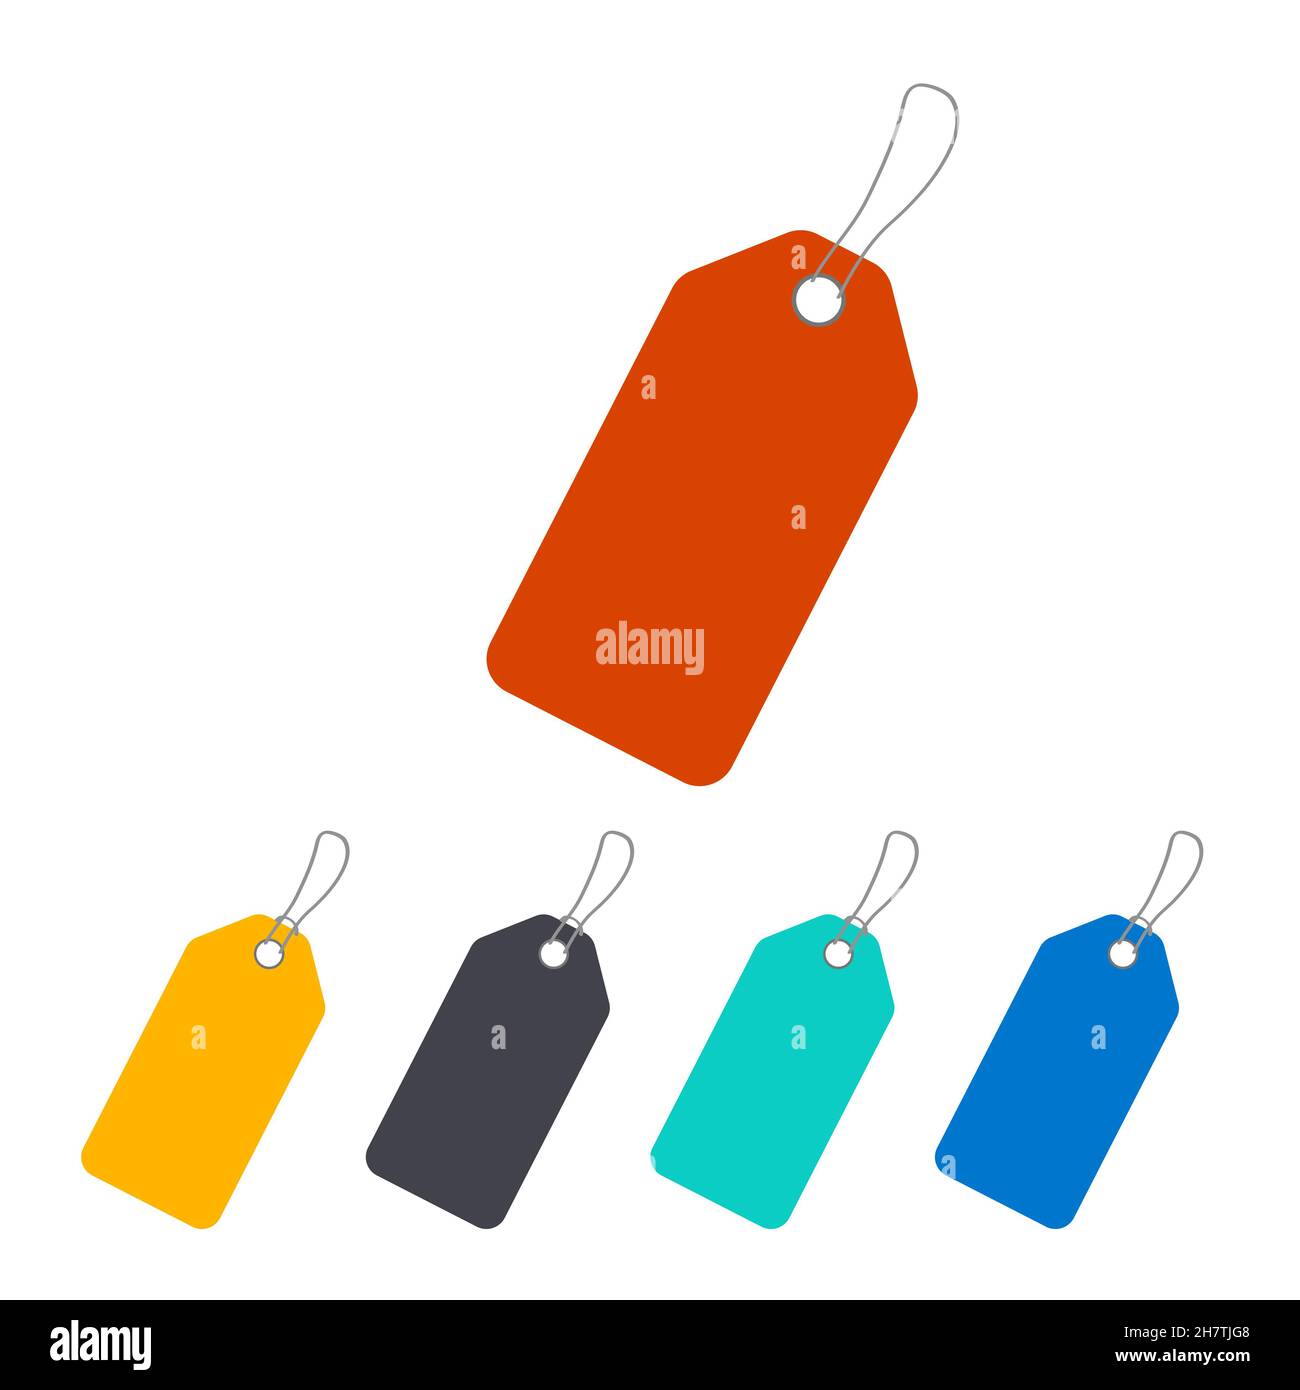 colourful-paper-price-tags-or-gift-tags-in-different-shapes-labels